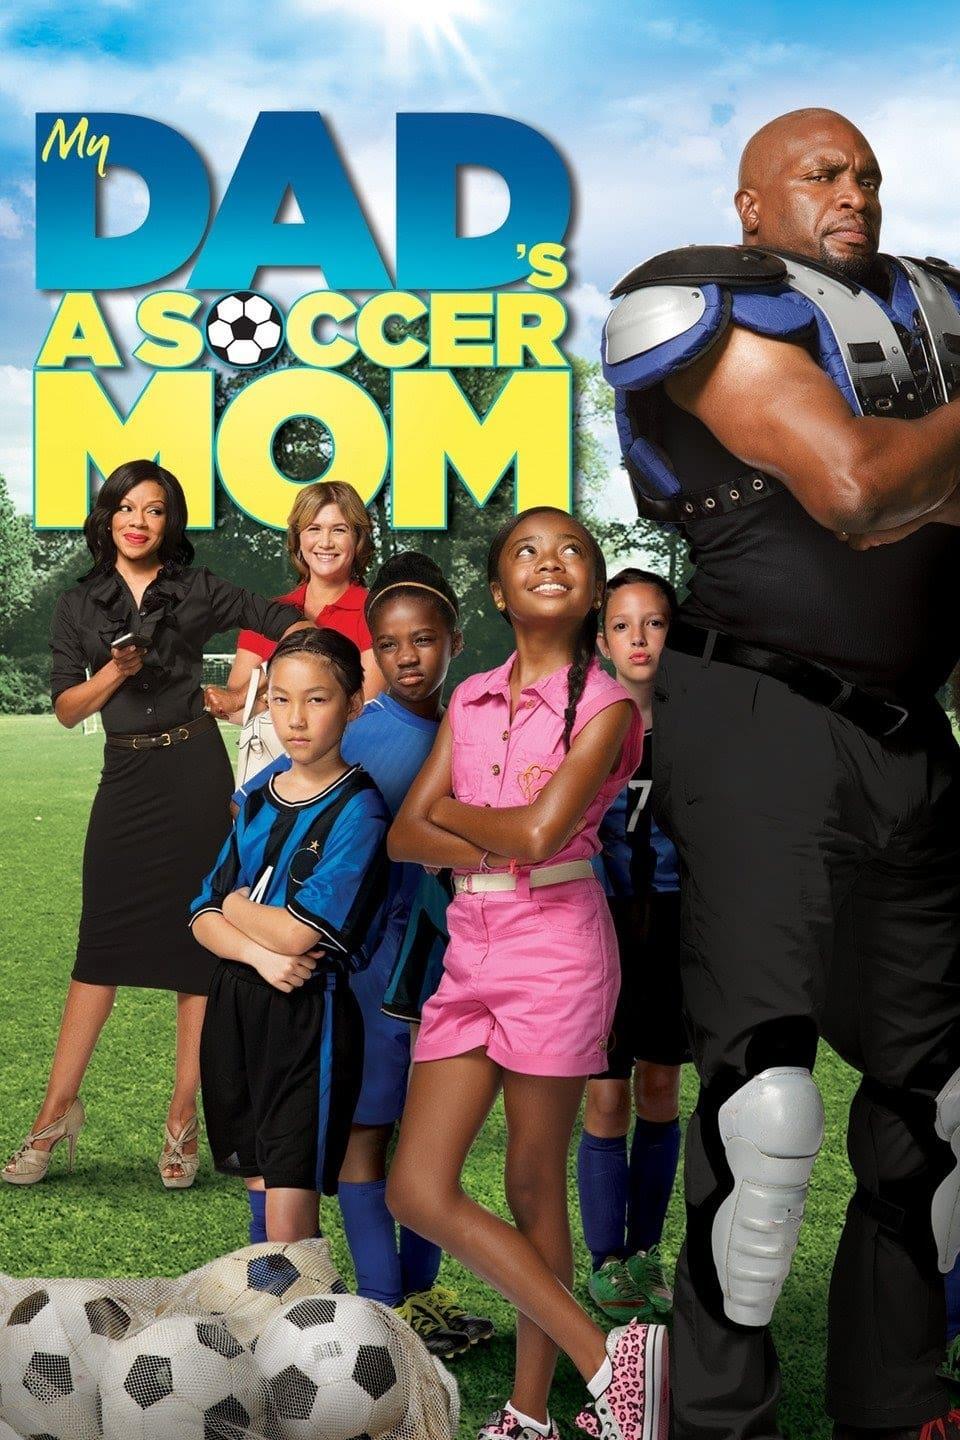 My Dad's a Soccer Mom poster